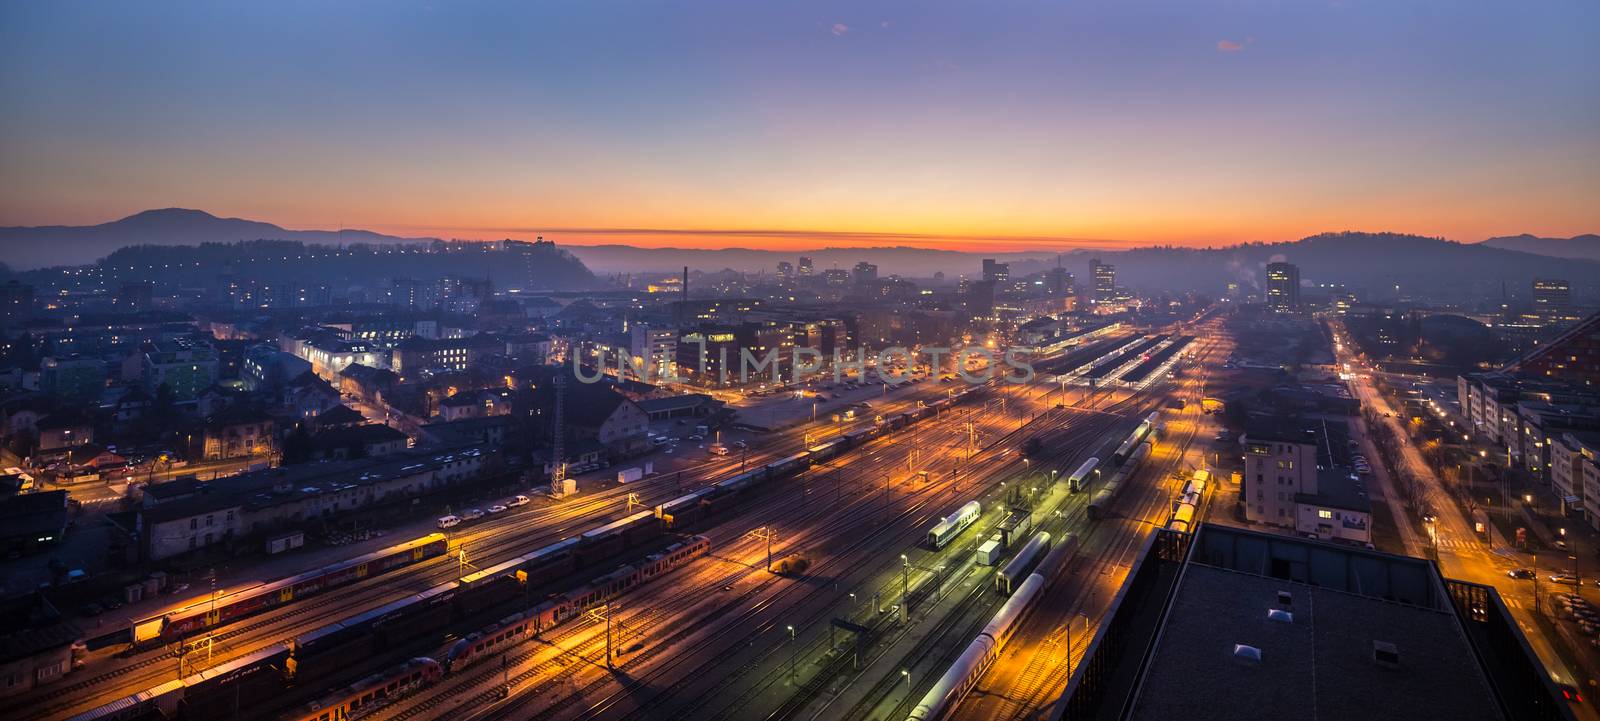 Cityscape of Slovenian capital Ljubljana at dusk. Aerial view of illuminated train tracks of a main railway station can be seen in forground.